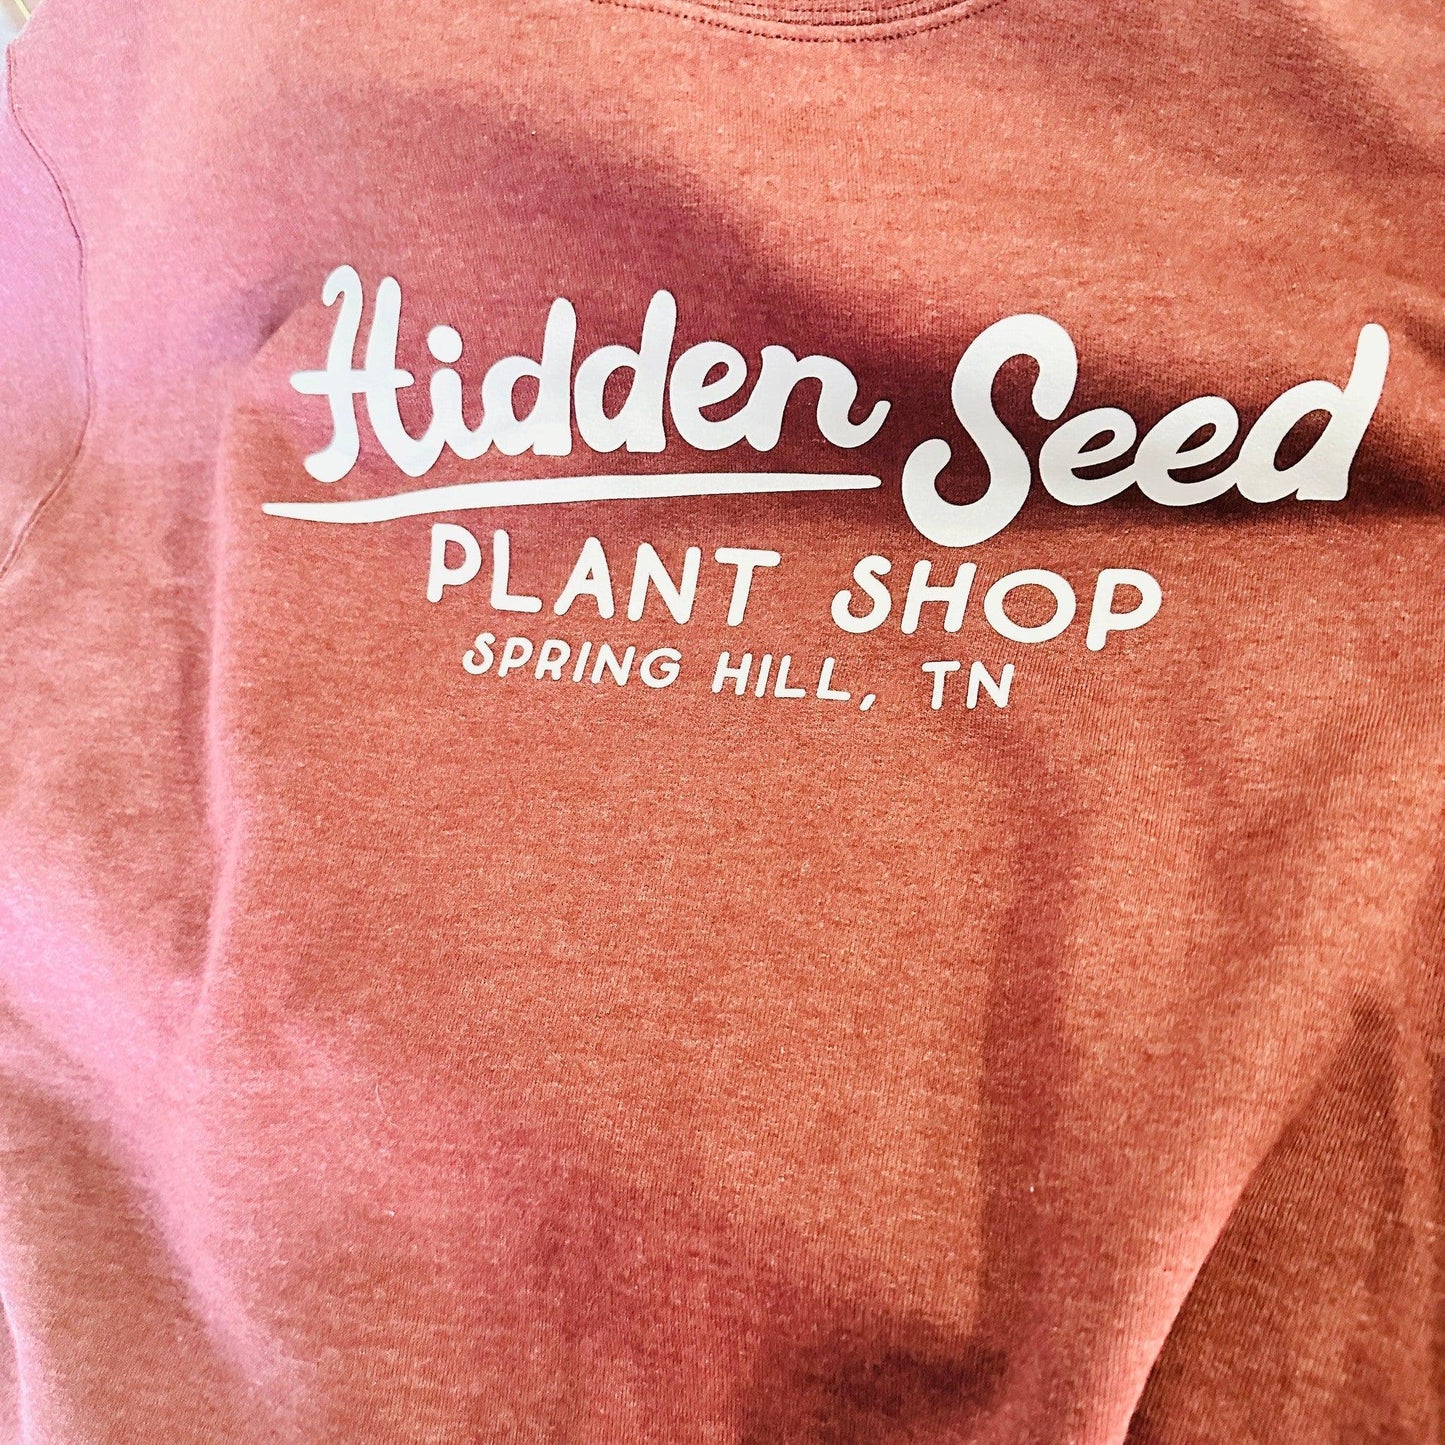 Tee’s + Sweatshirts (PLANTS on Front Logo on Back)-available at Hidden Seed Plant Shop